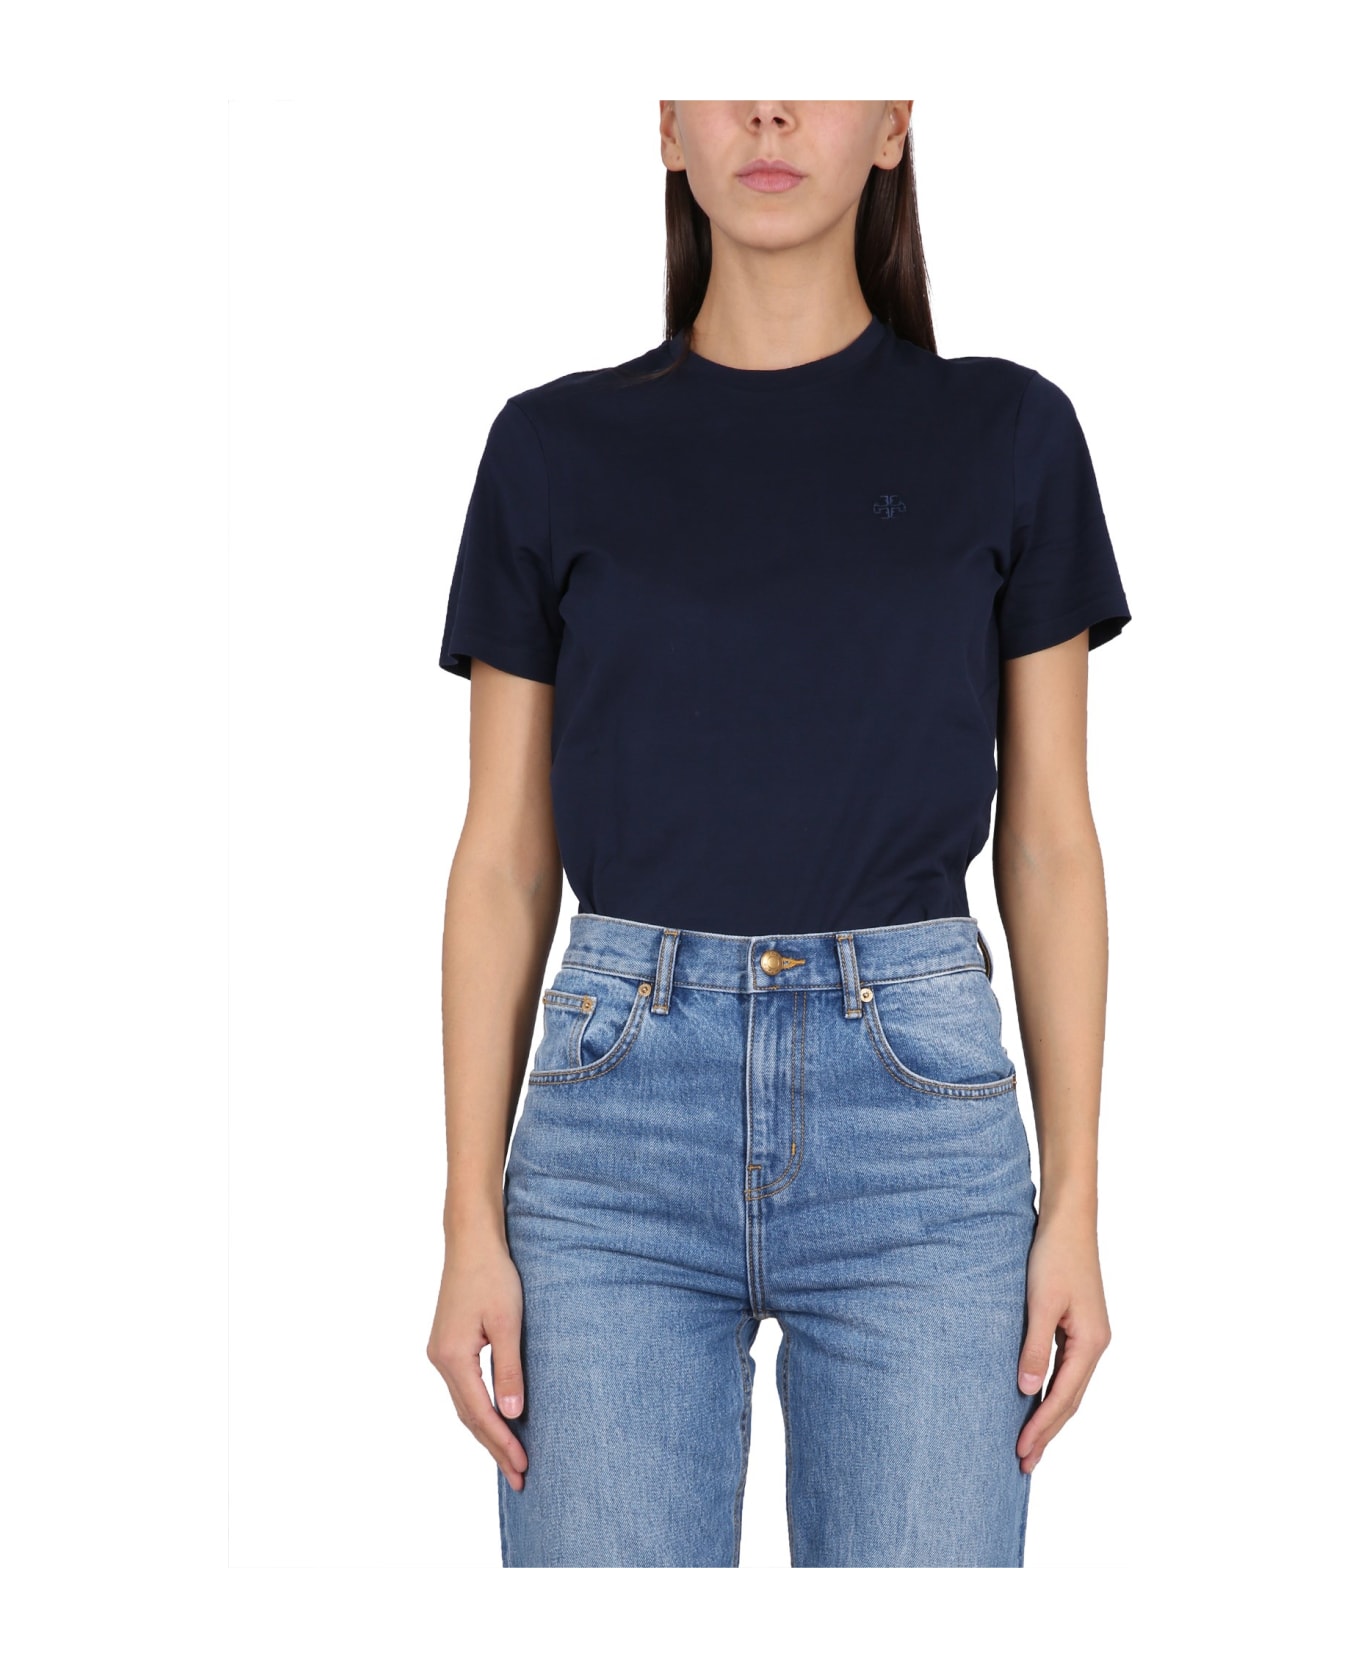 Tory Burch Embroidered Logo T-shirt - BLUE